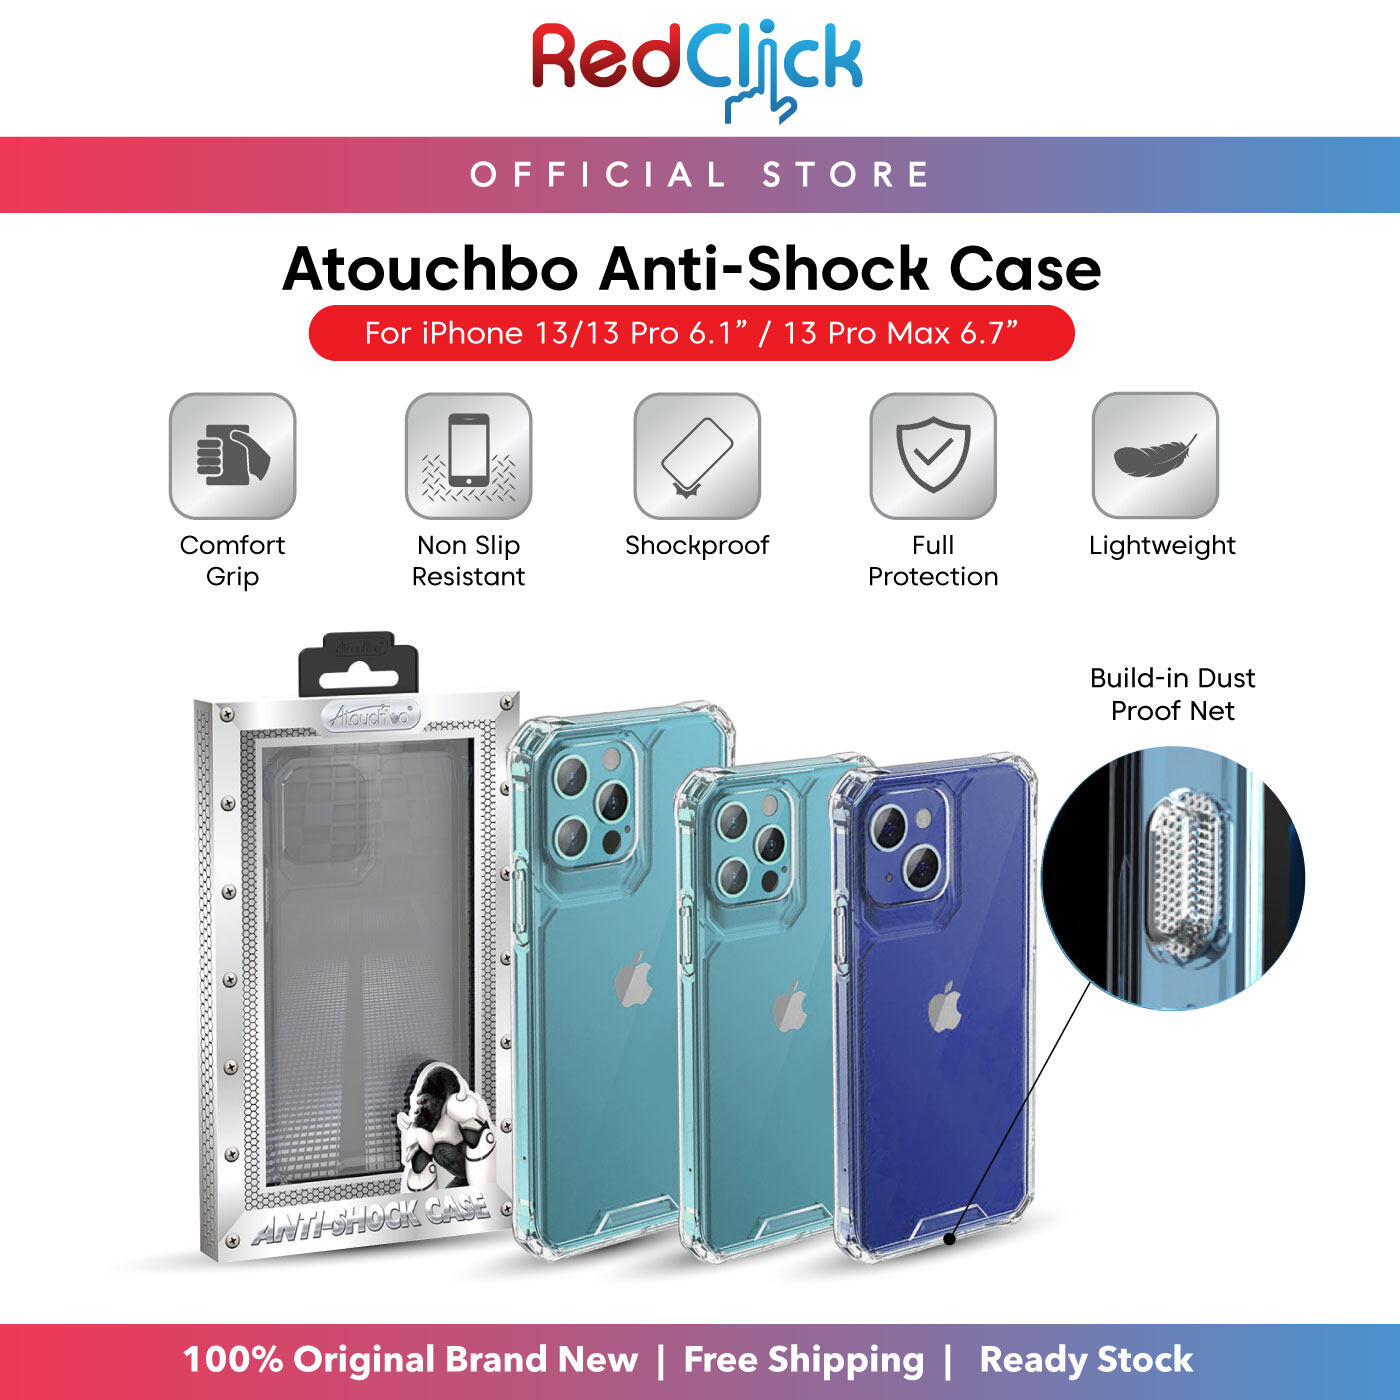 Atouchbo Anti Shock  Case for  iPh 13 / 13 Pro / 13 Pro Max Full Protection Build In Dust Proof Net Non Slip Resistant